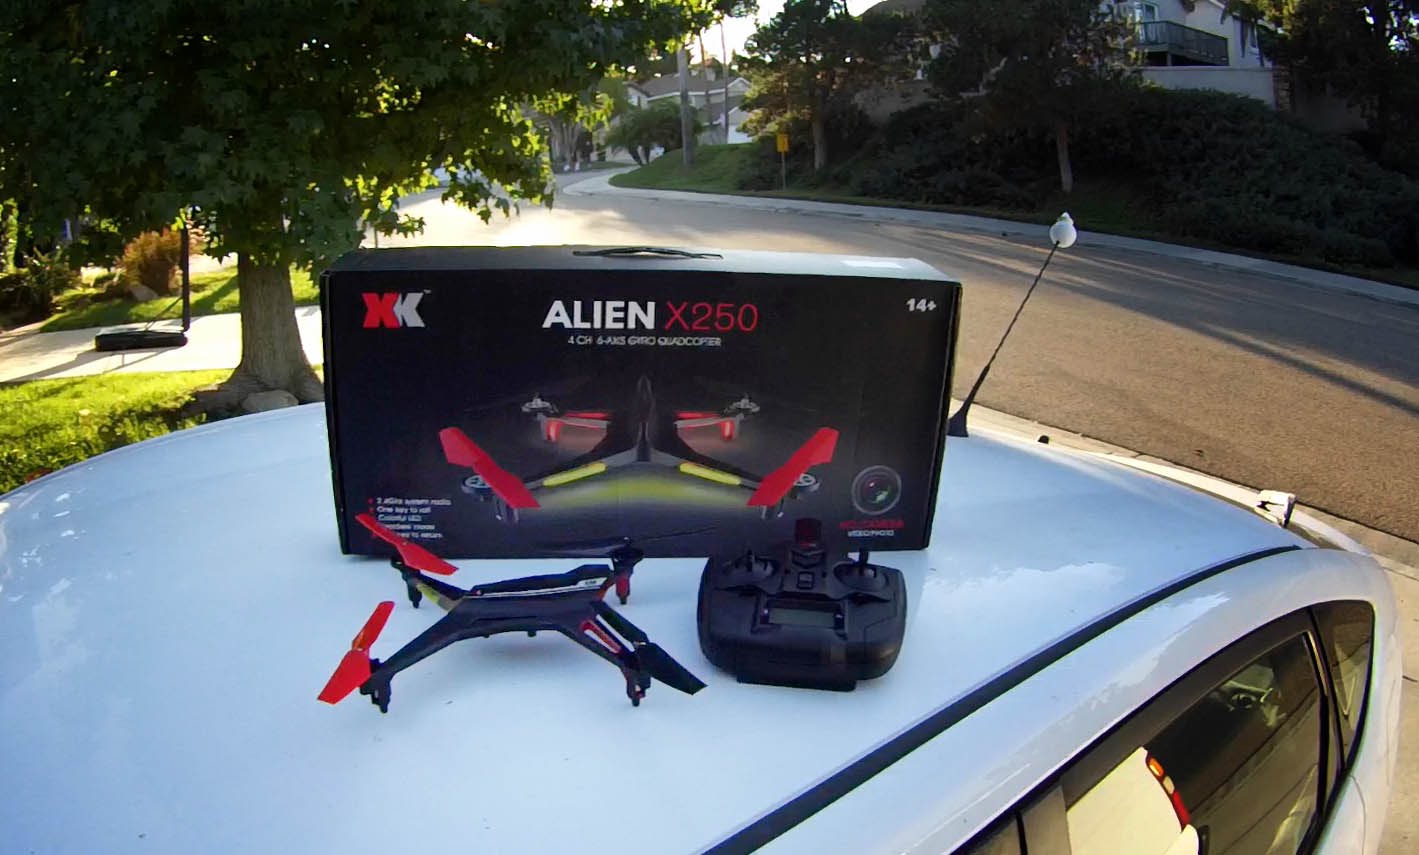 XK ALIEN X250 – A Beginners Dream Quadcopter. All Others Look Elsewhere